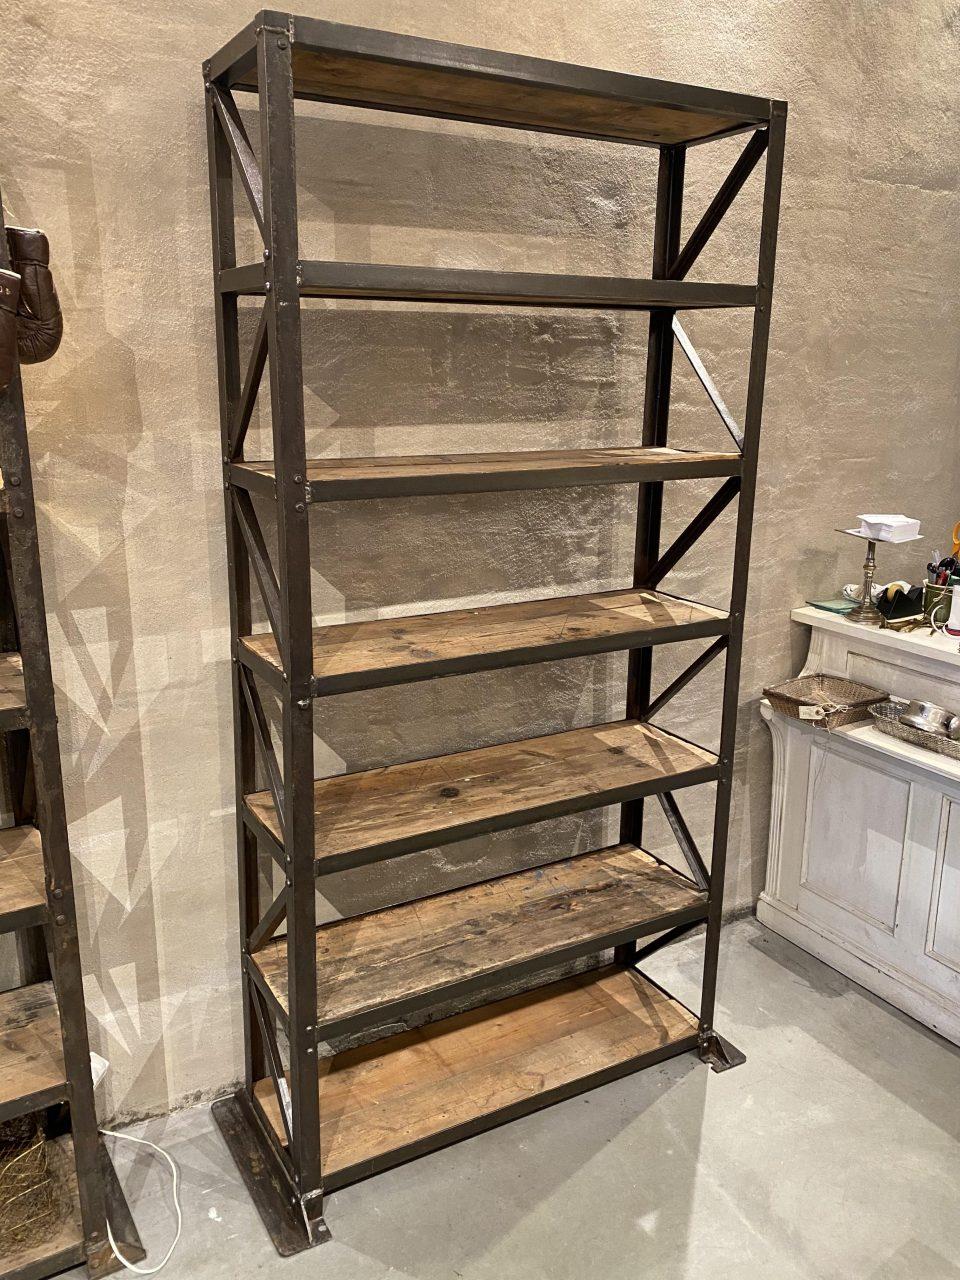 Raw and rustic man-high vintage French industrial shelf unit /bookcase. Originates from a now closed French warehouse, dating from the beginning of the last century. Appears as a sculptural dark iron frame solid quality structure, and divided into 7